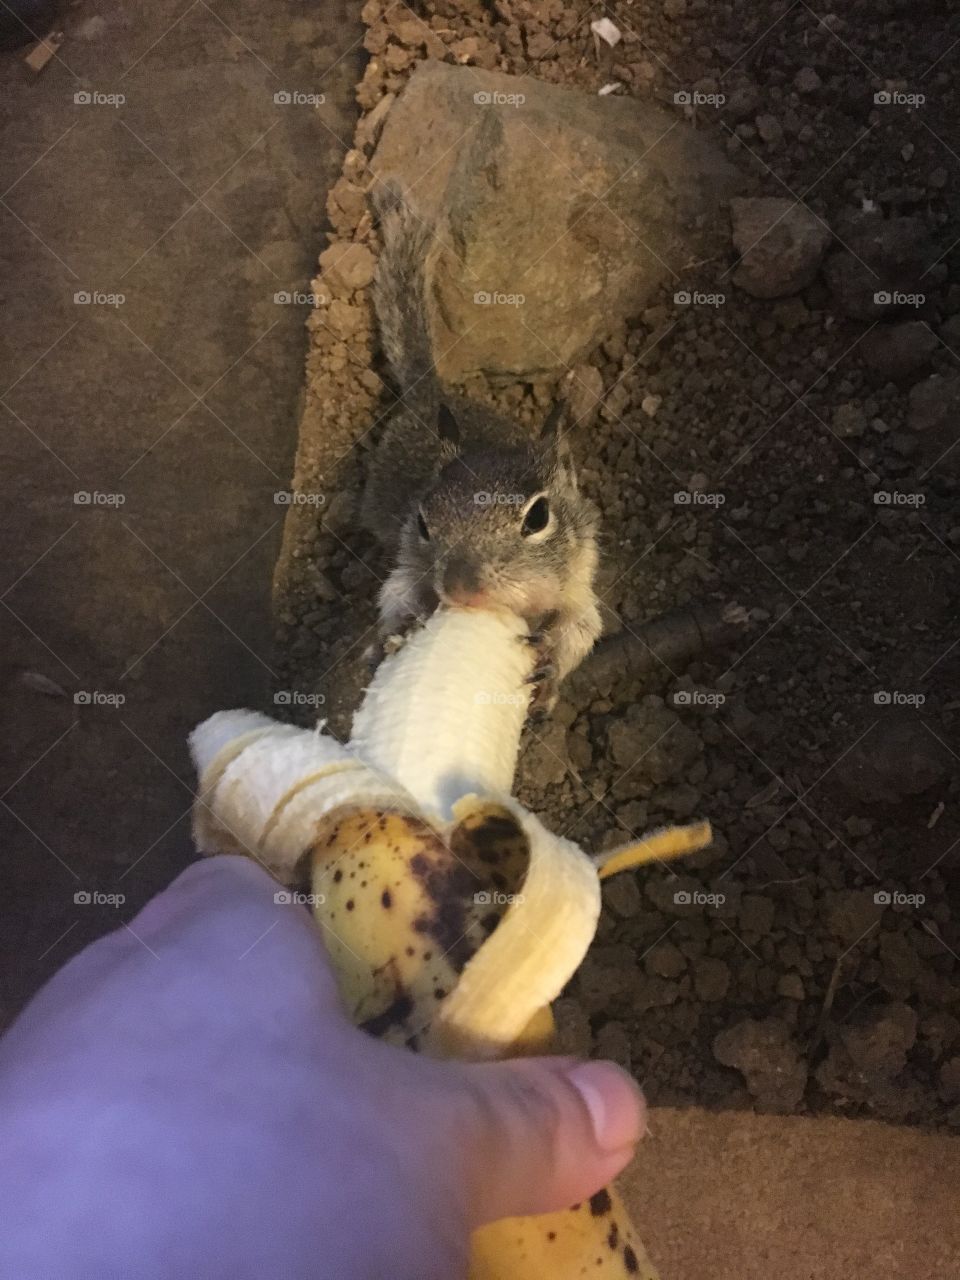 A baby California ground squirrel with blue eyes enjoying a delicious banana dinner! She balances on her hind legs and grasps the fruit with her long claws.